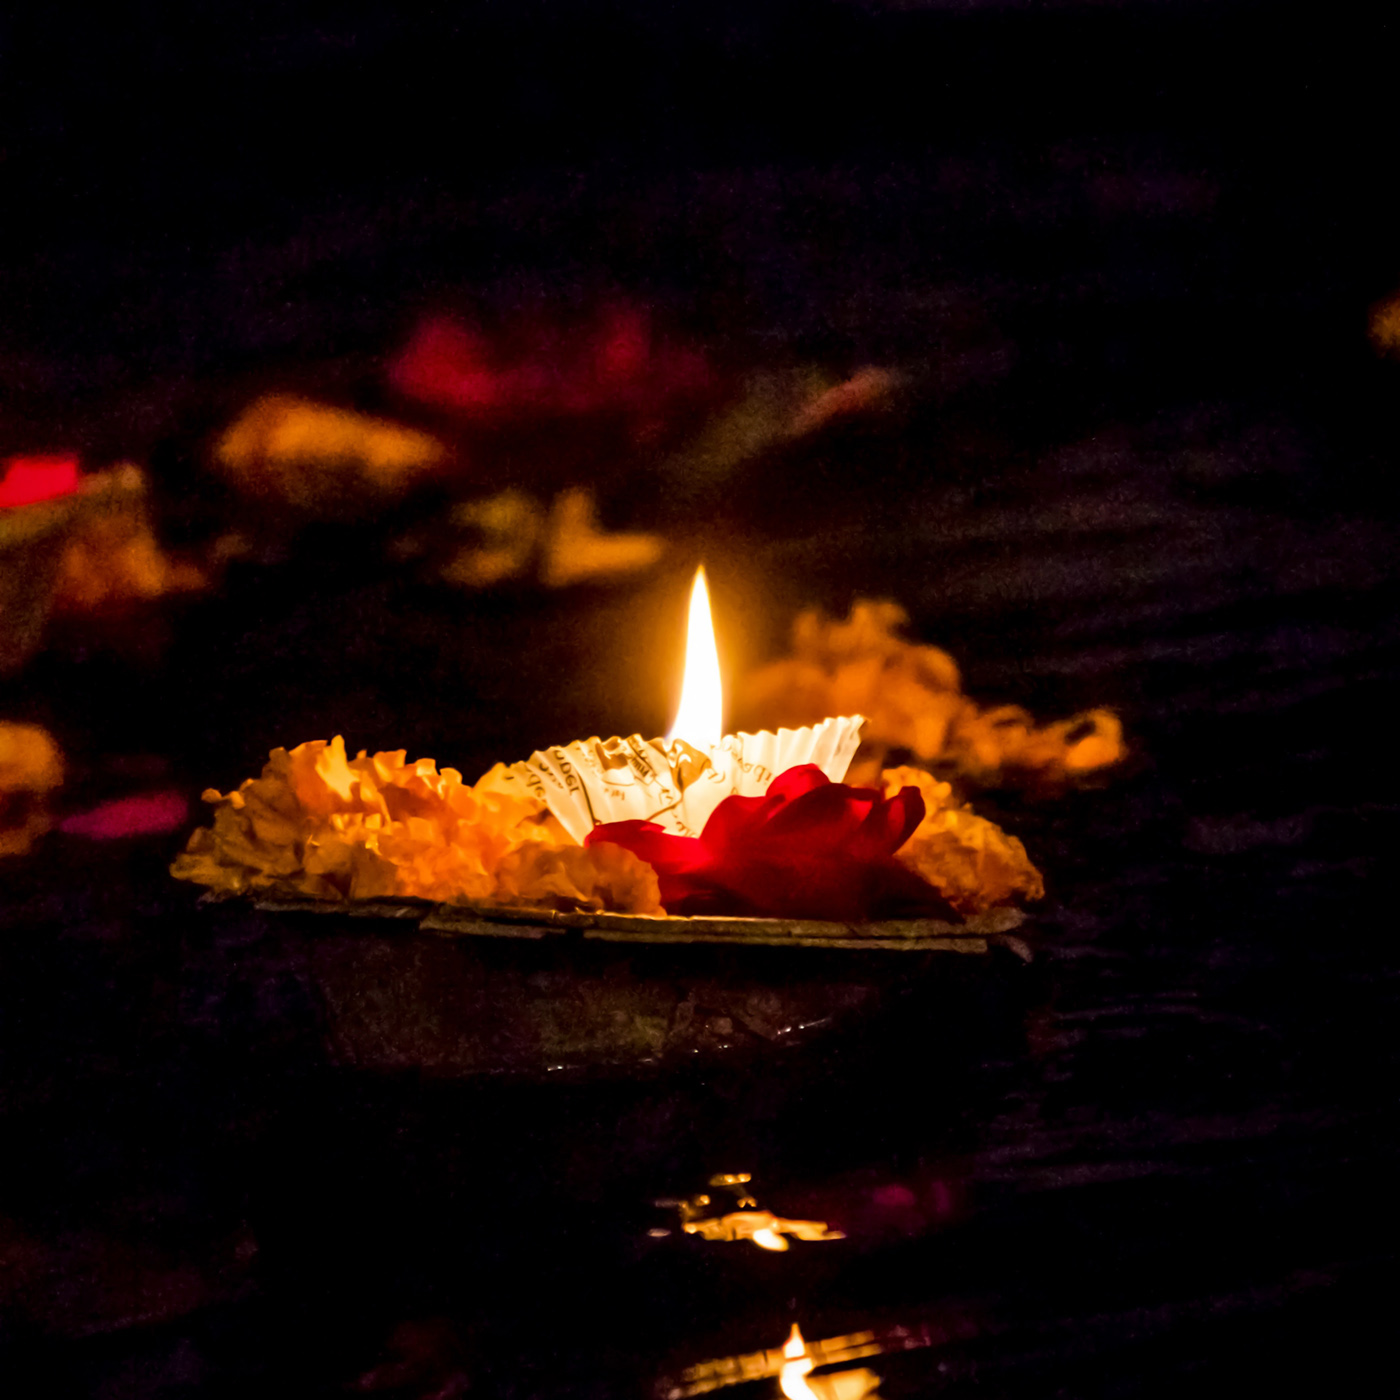 Candle floatin on water at night